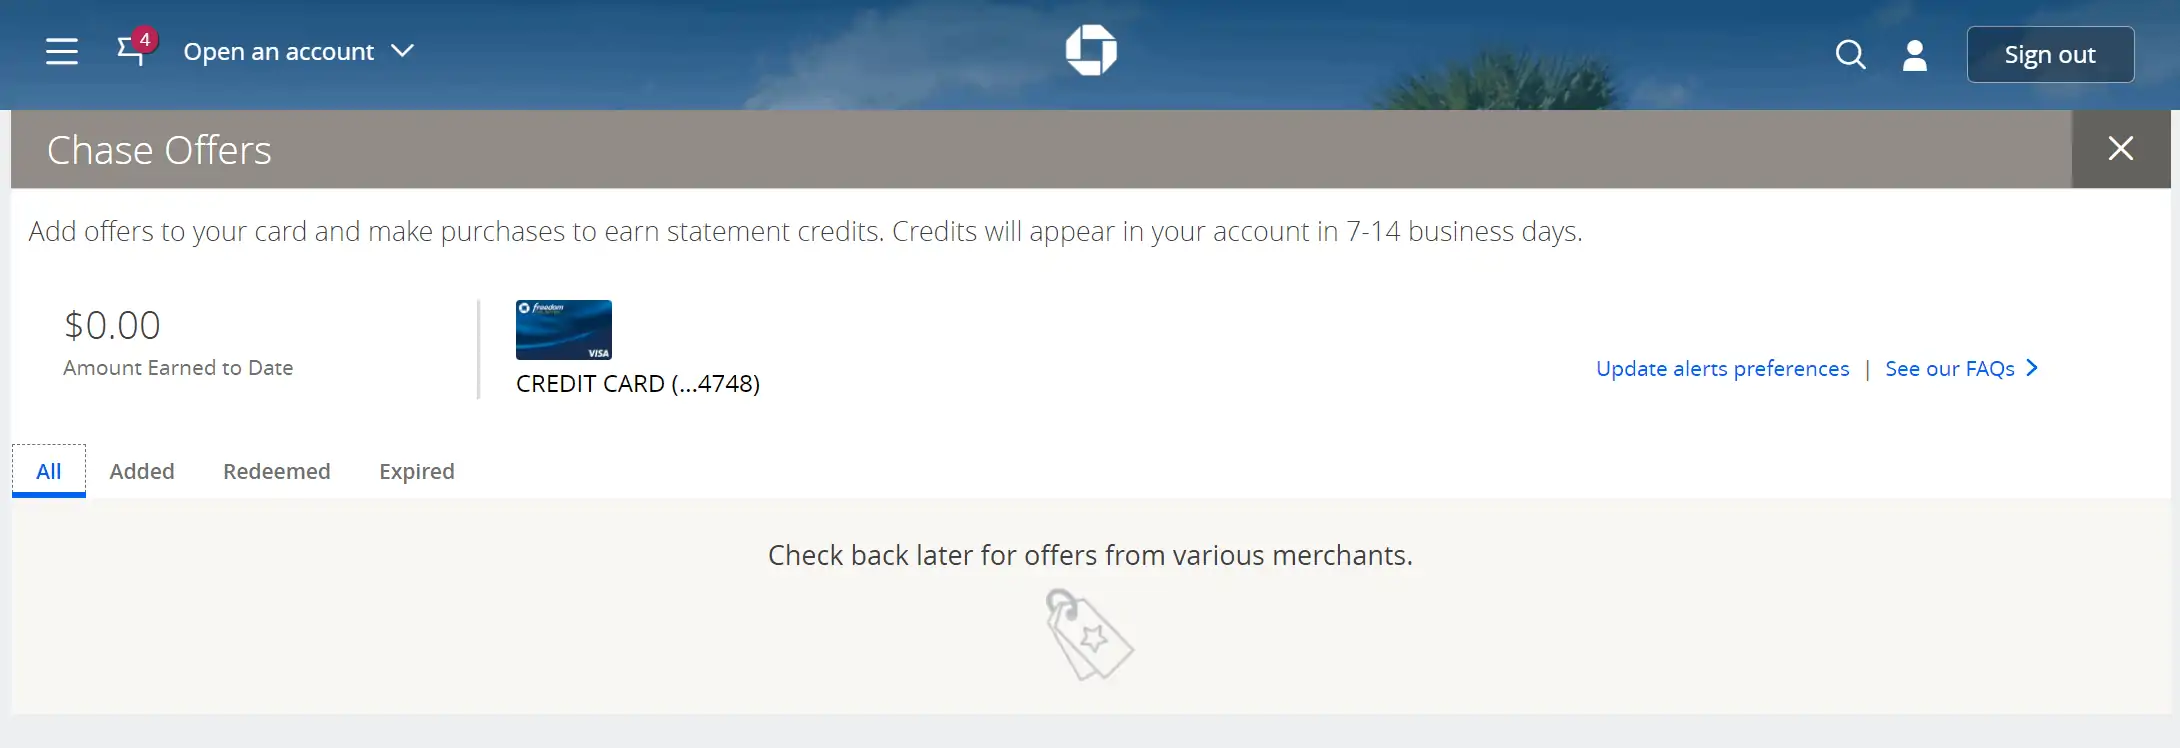 Screenshot of Chase Offers for the Chase Freedom Unlimited credit card